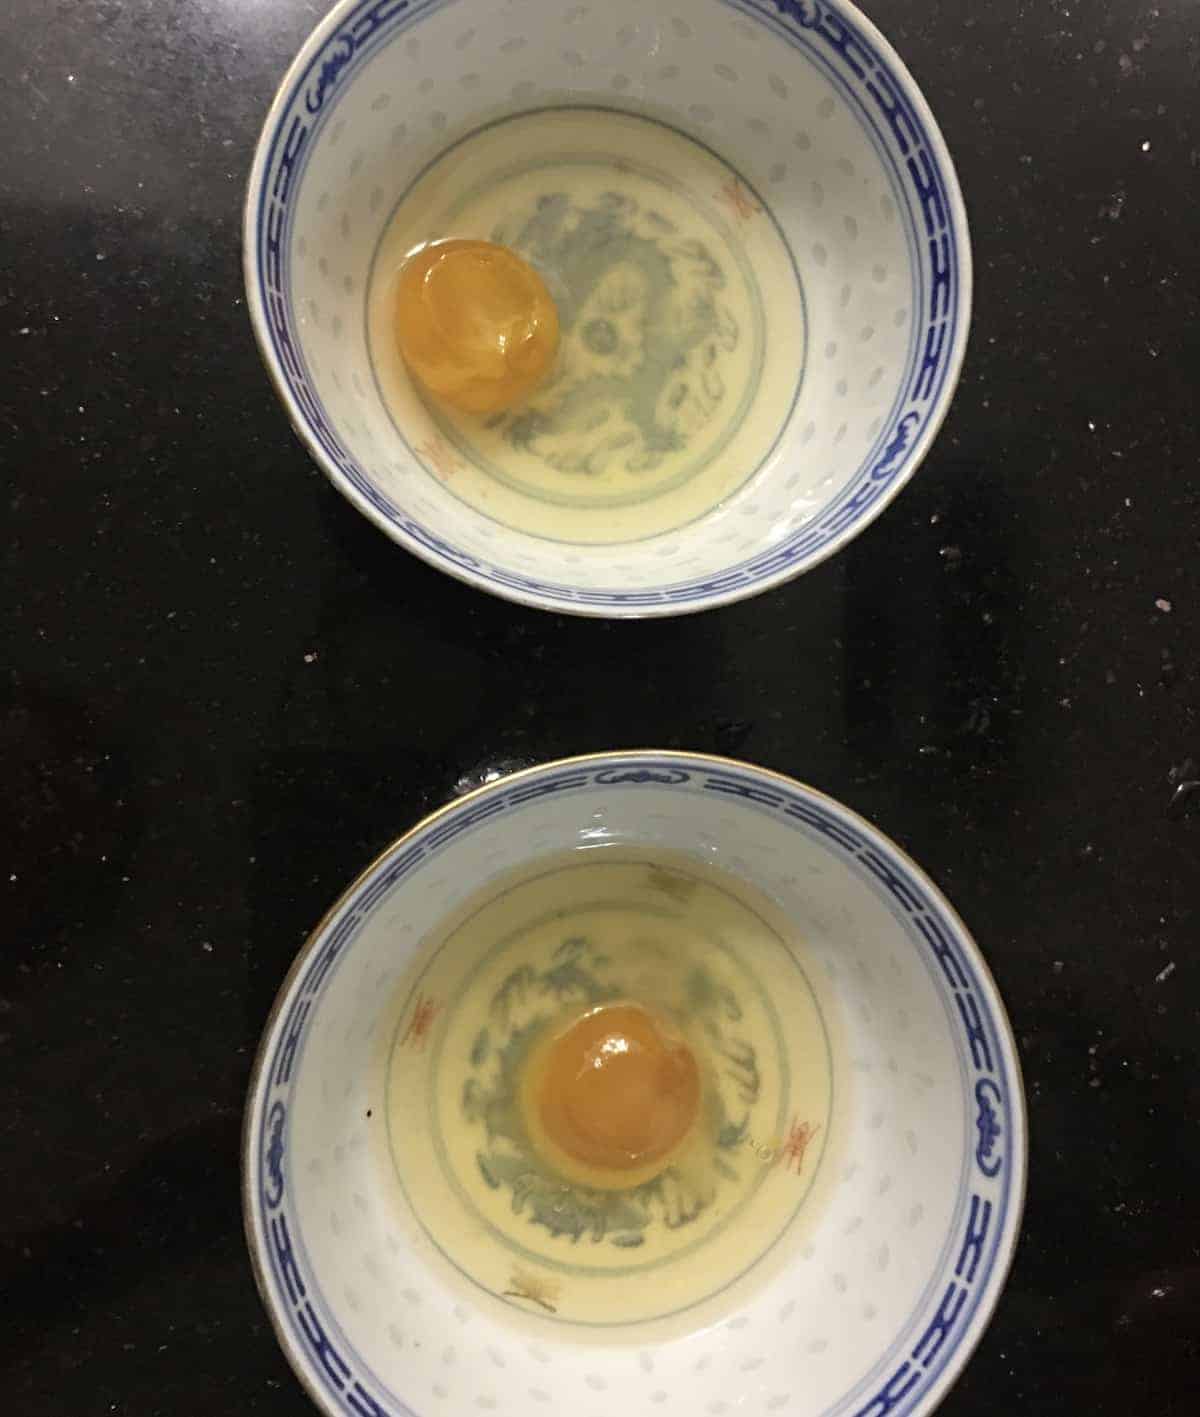 Comparing salted eggs made with and without shaoxing to see if the yolk became brighter.